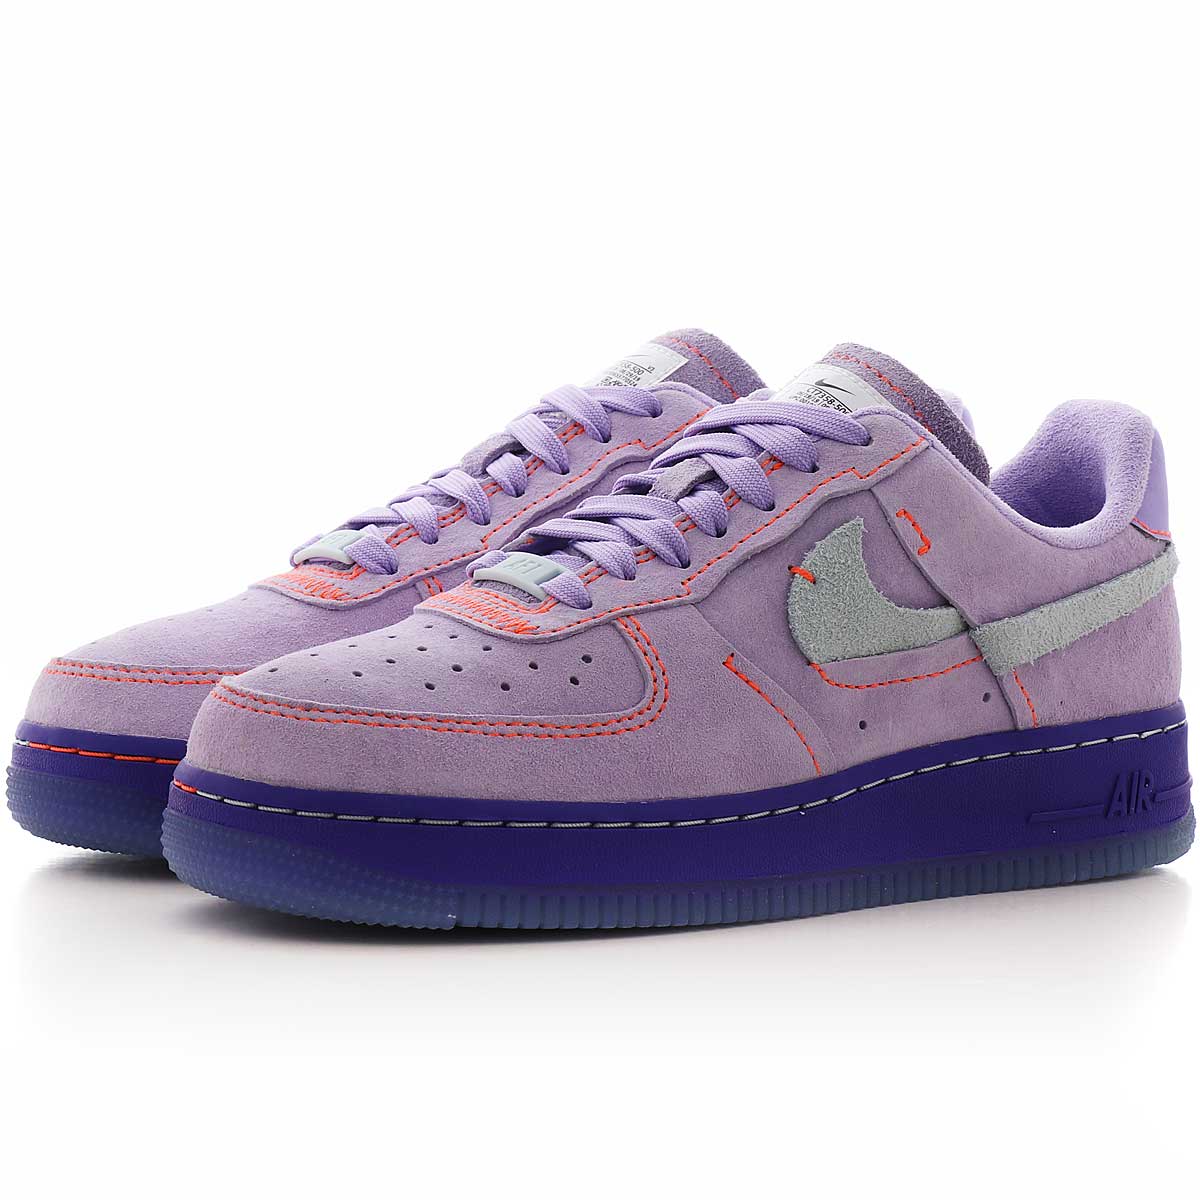 Zuigeling Puno Kind Buy WMNS AIR FORCE 1 '07 LX for N/A 0.0 on KICKZ.com!